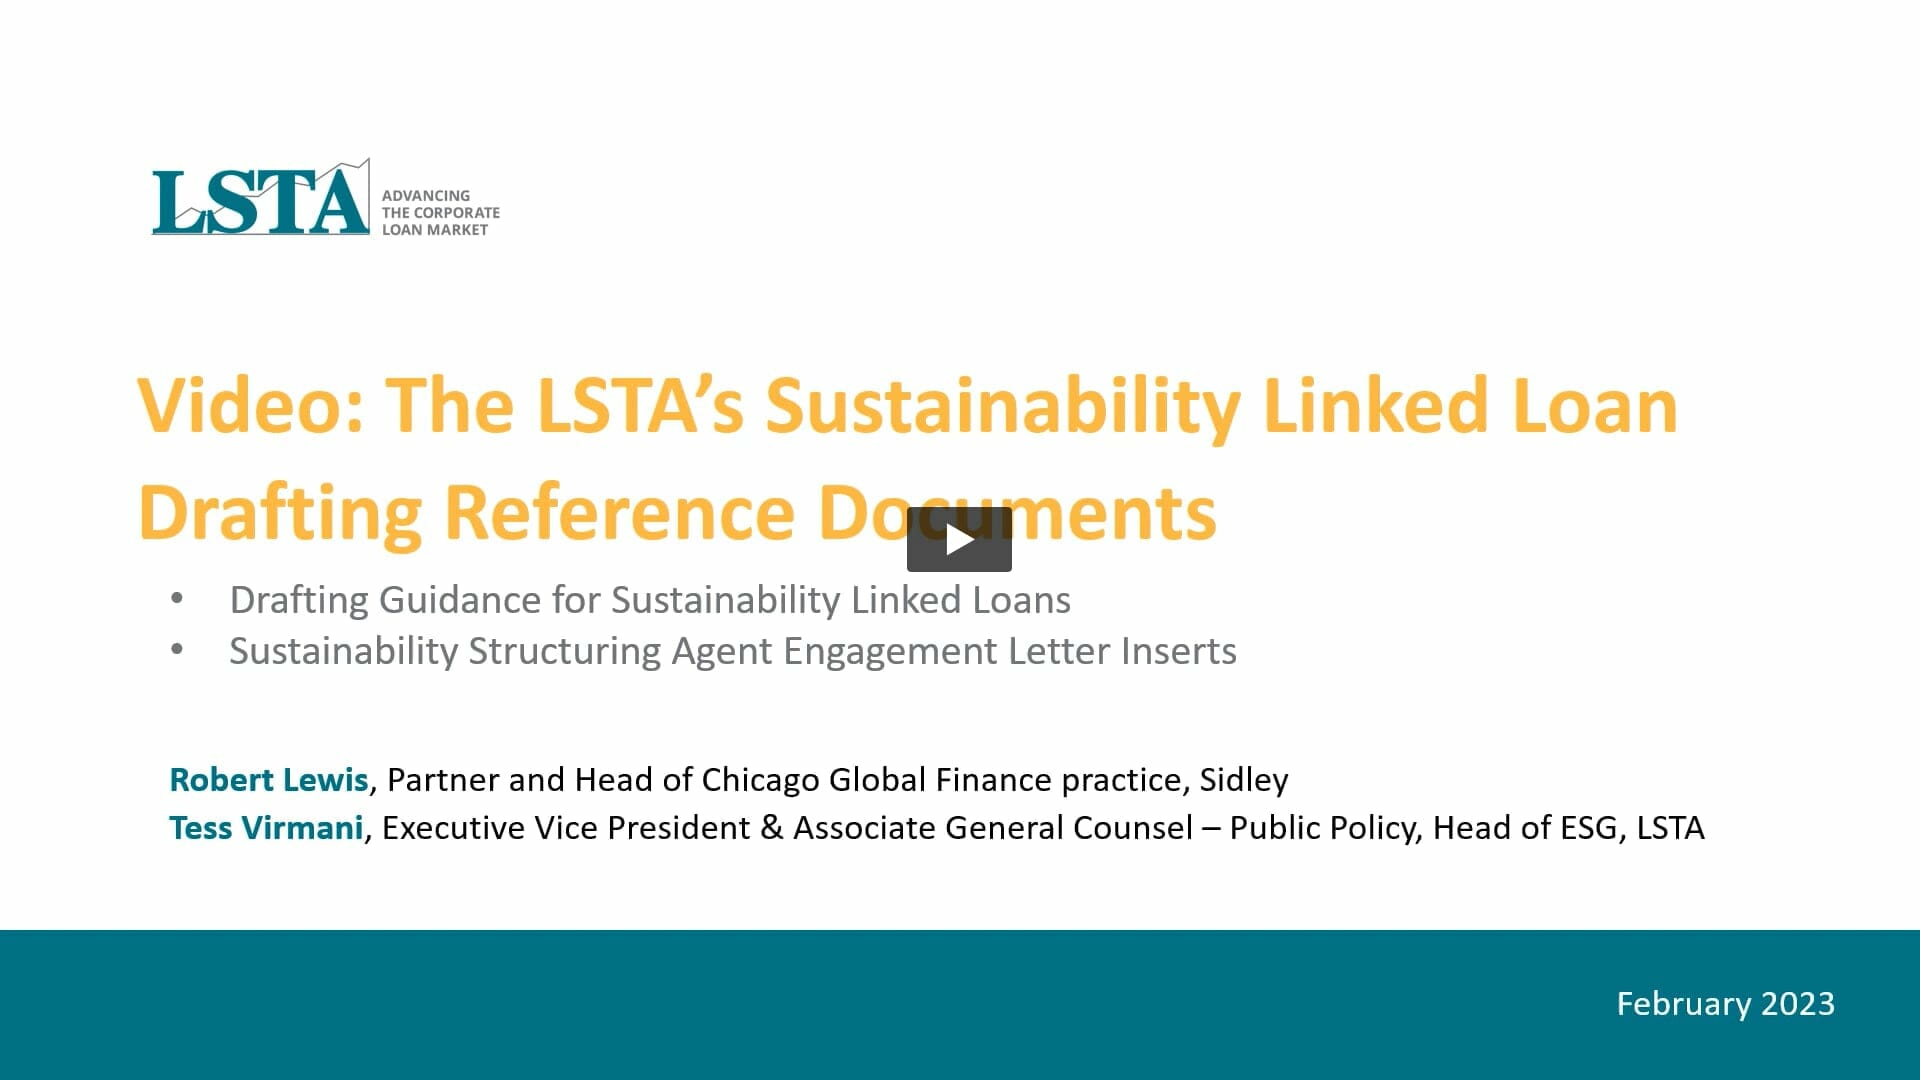 The LSTA’s Sustainability Linked Loan Drafting Reference Documents